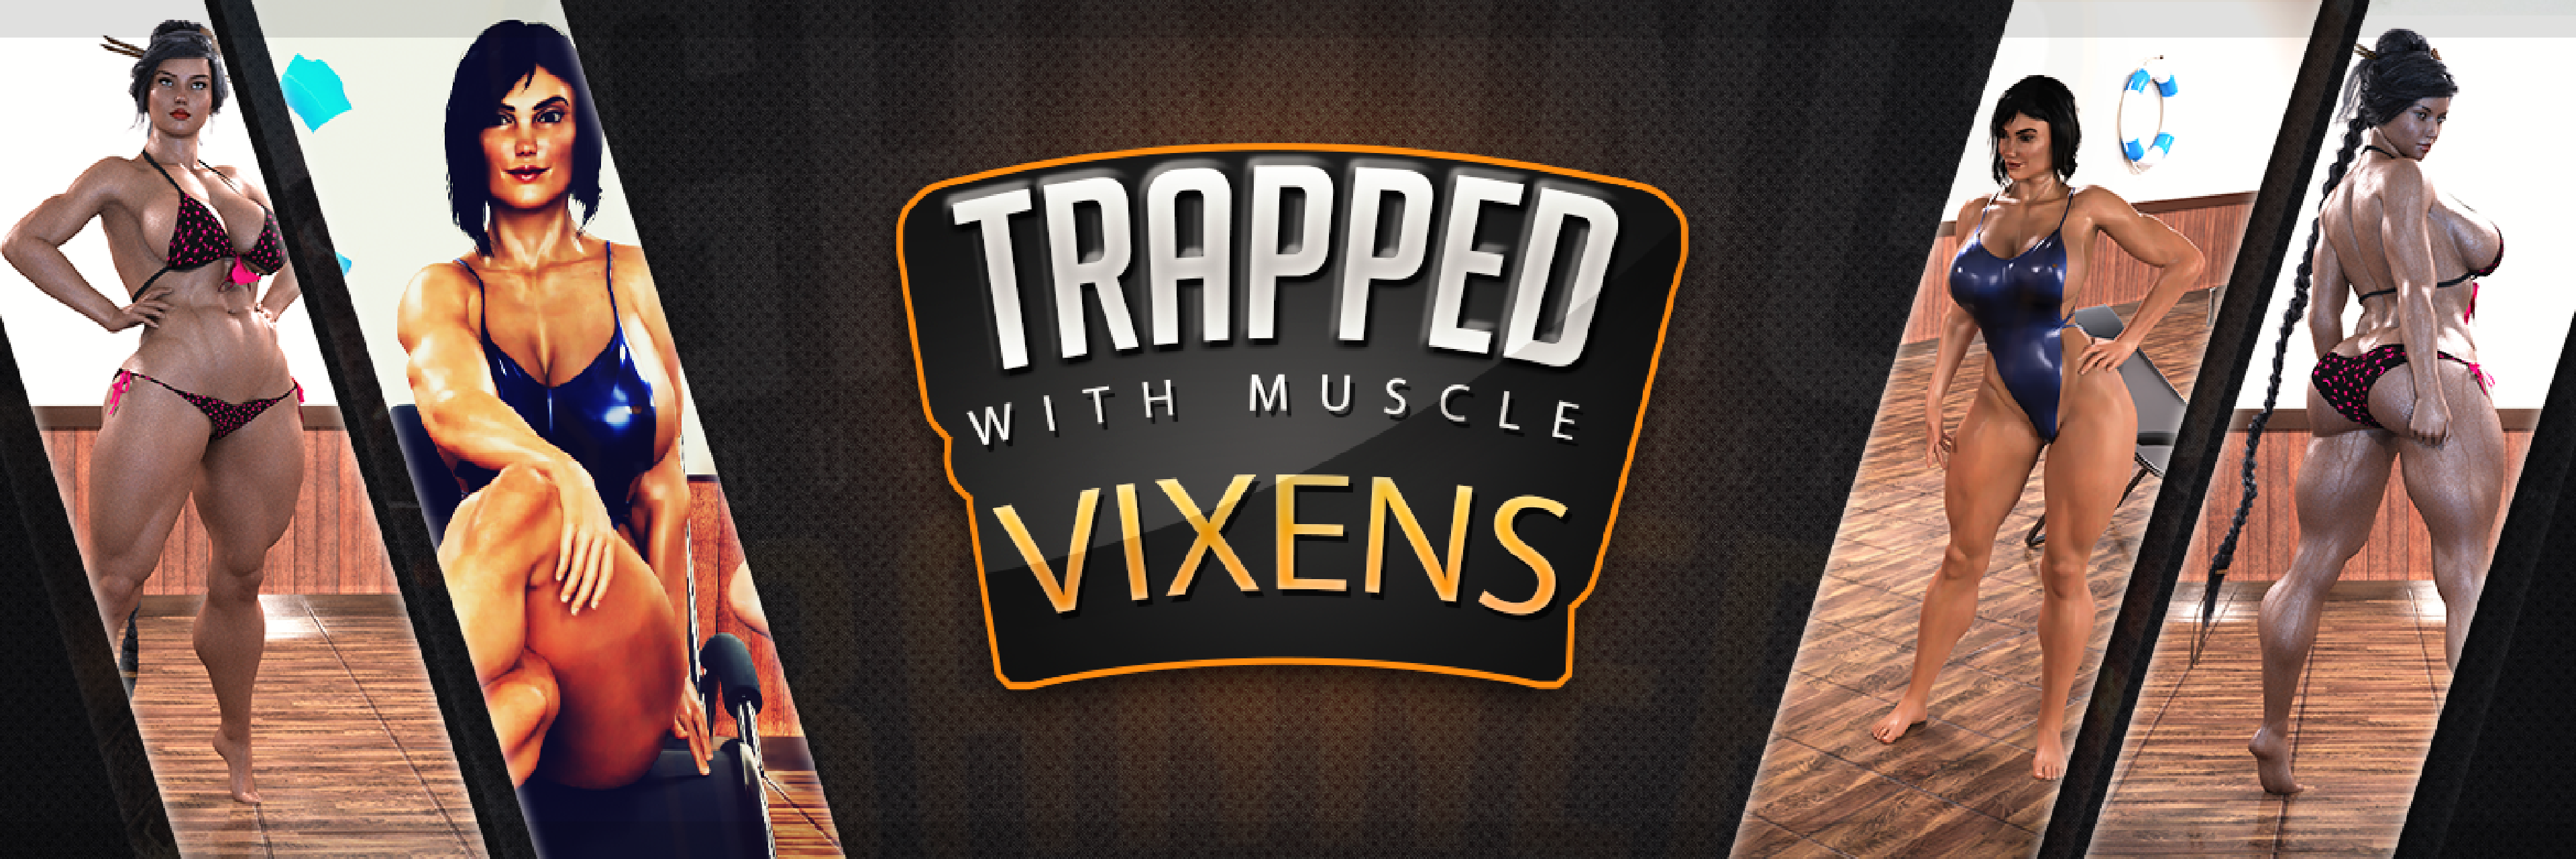 Trapped with Muscle Vixens